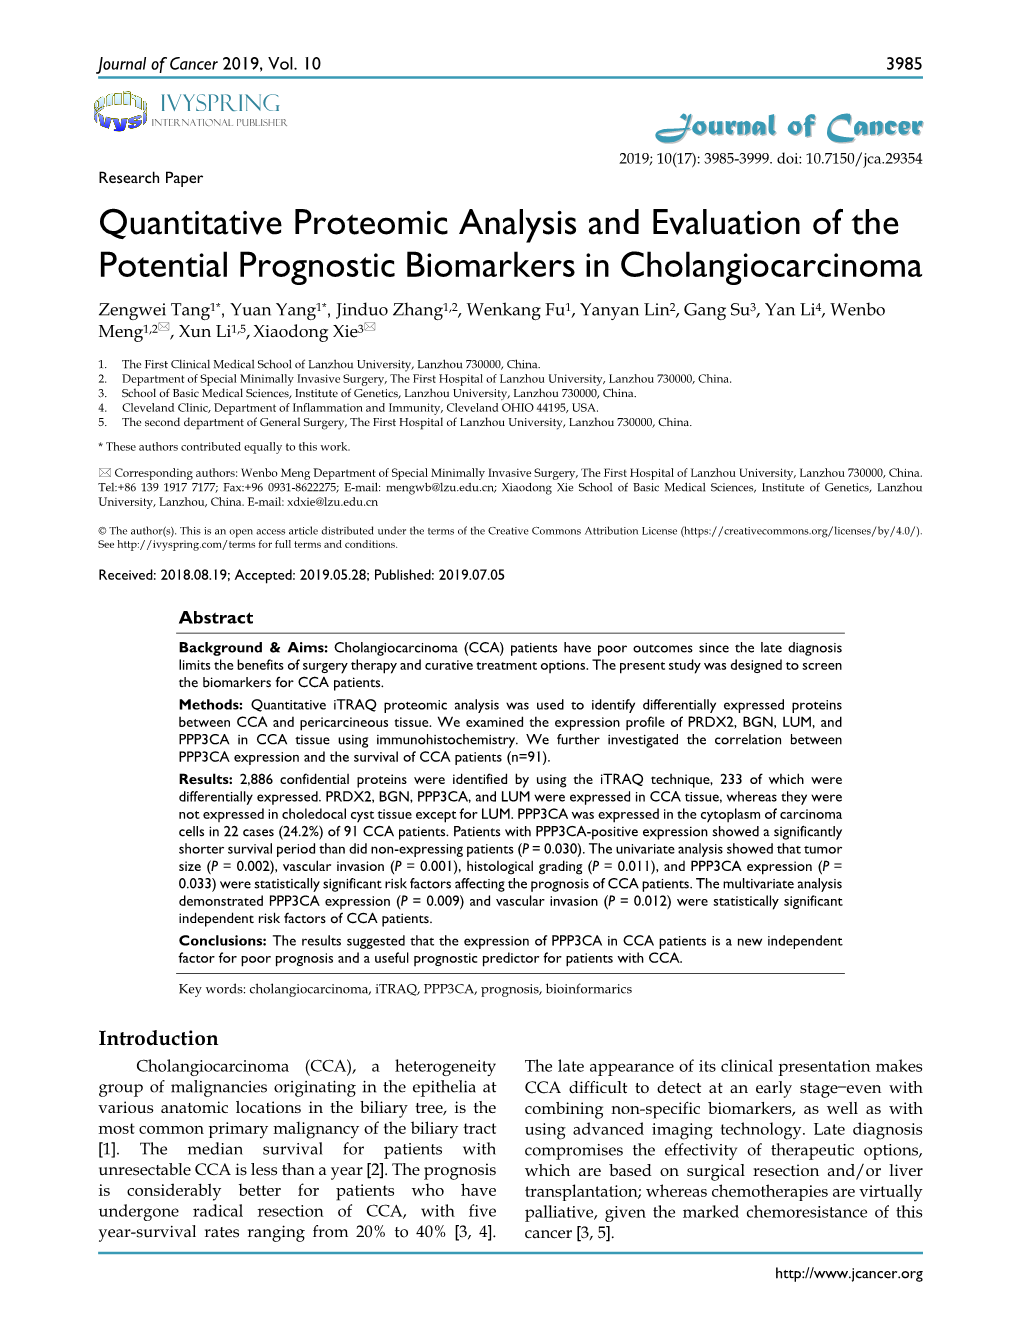 Quantitative Proteomic Analysis and Evaluation of the Potential Prognostic Biomarkers in Cholangiocarcinoma